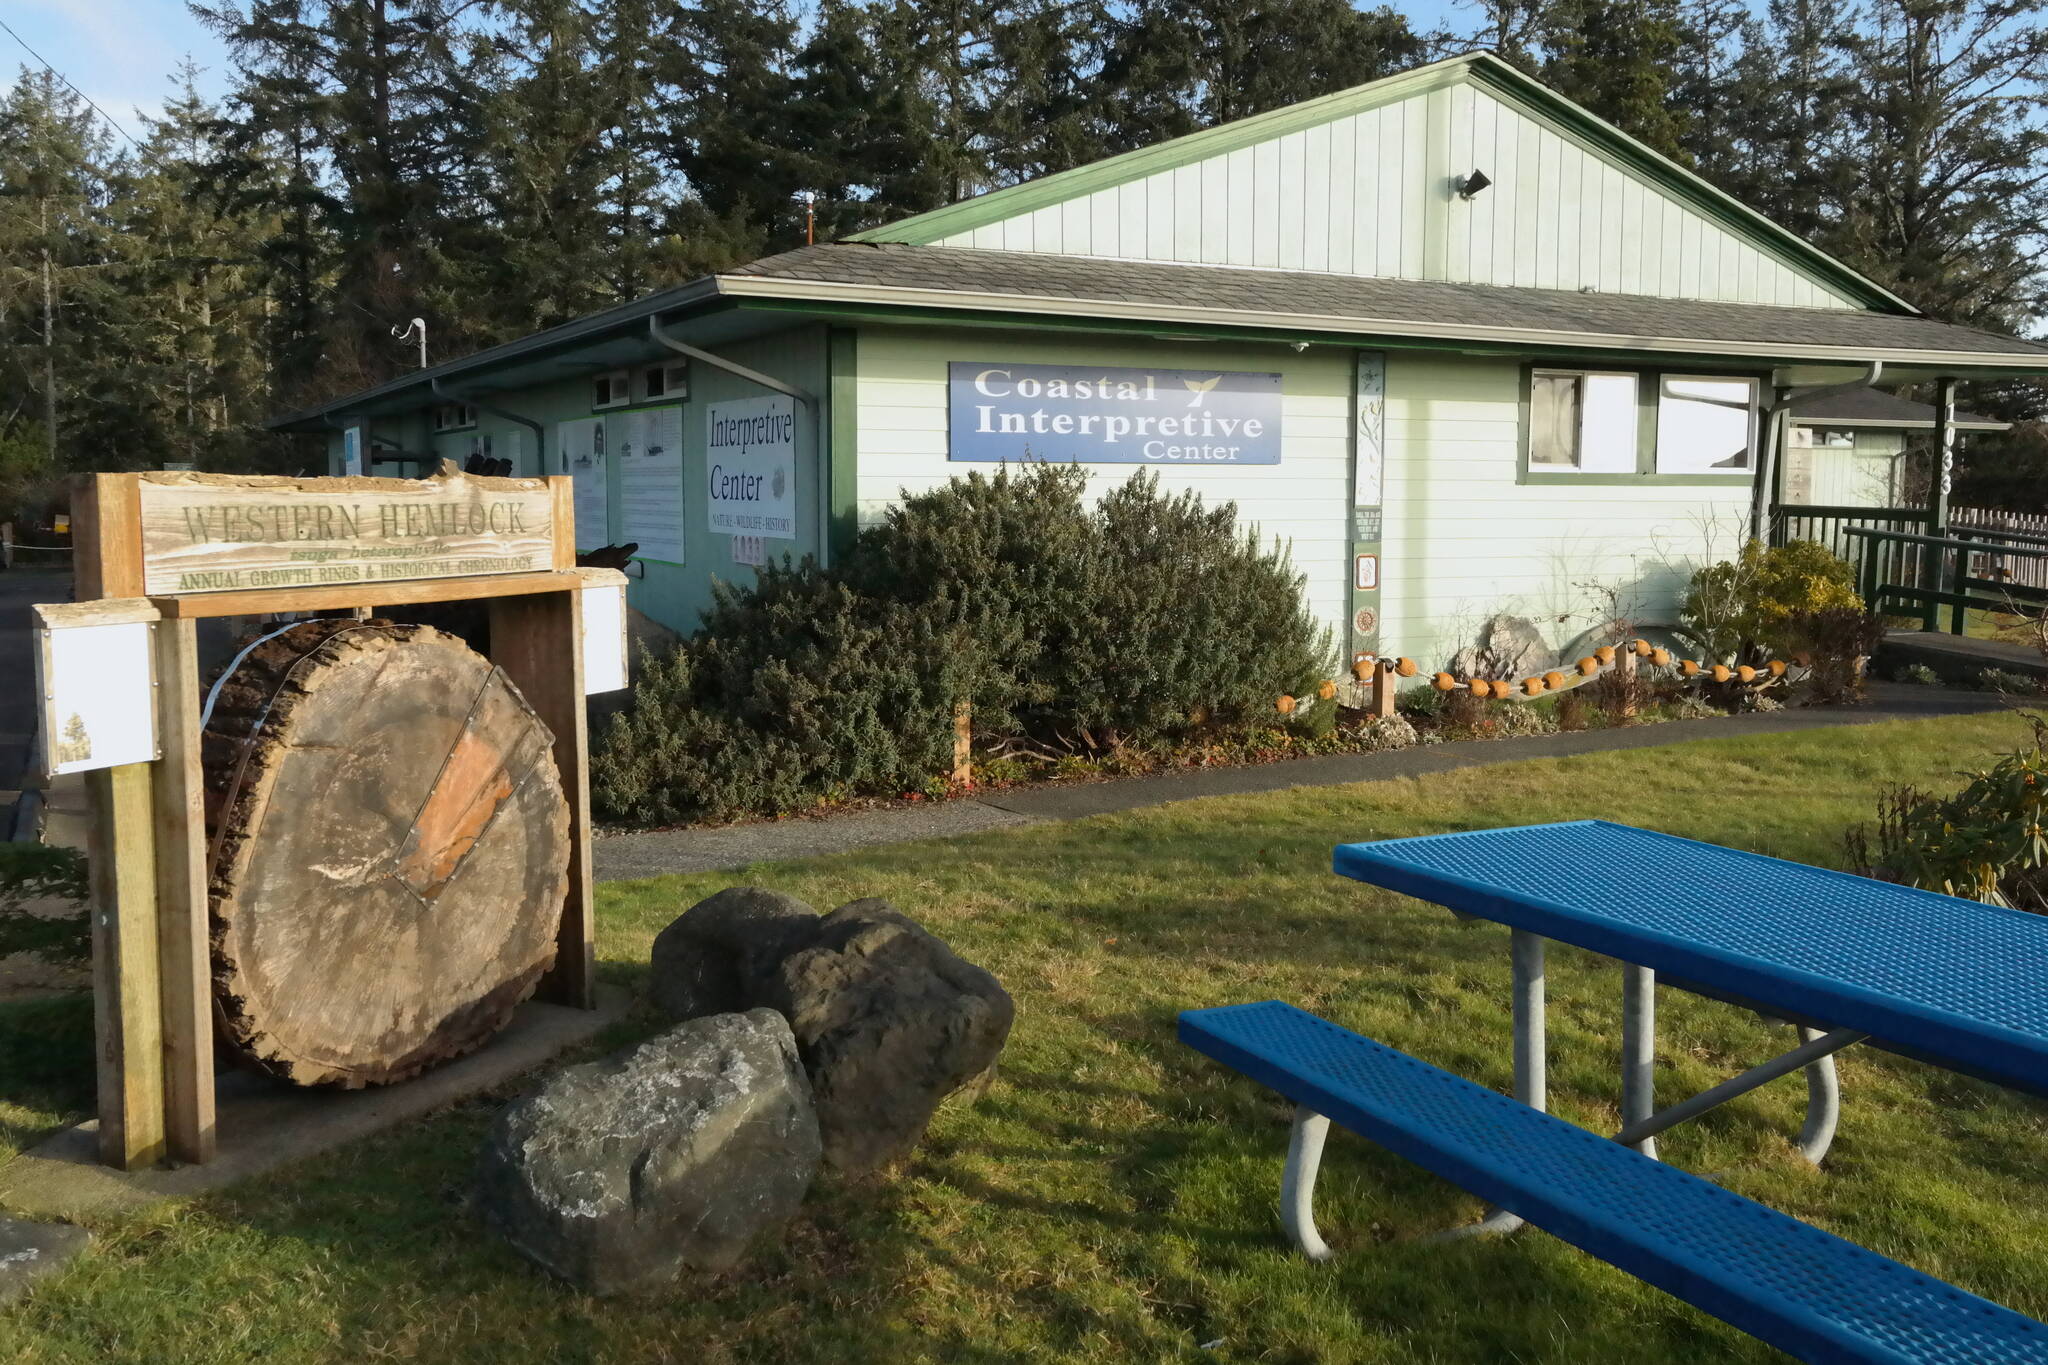 The Coastal Interpretive Center in Ocean Shores will host an easter egg hunt Saturday, April 16 from 11 a.m. to 1 p.m. FILE PHOTO I THE DAILY WORLD